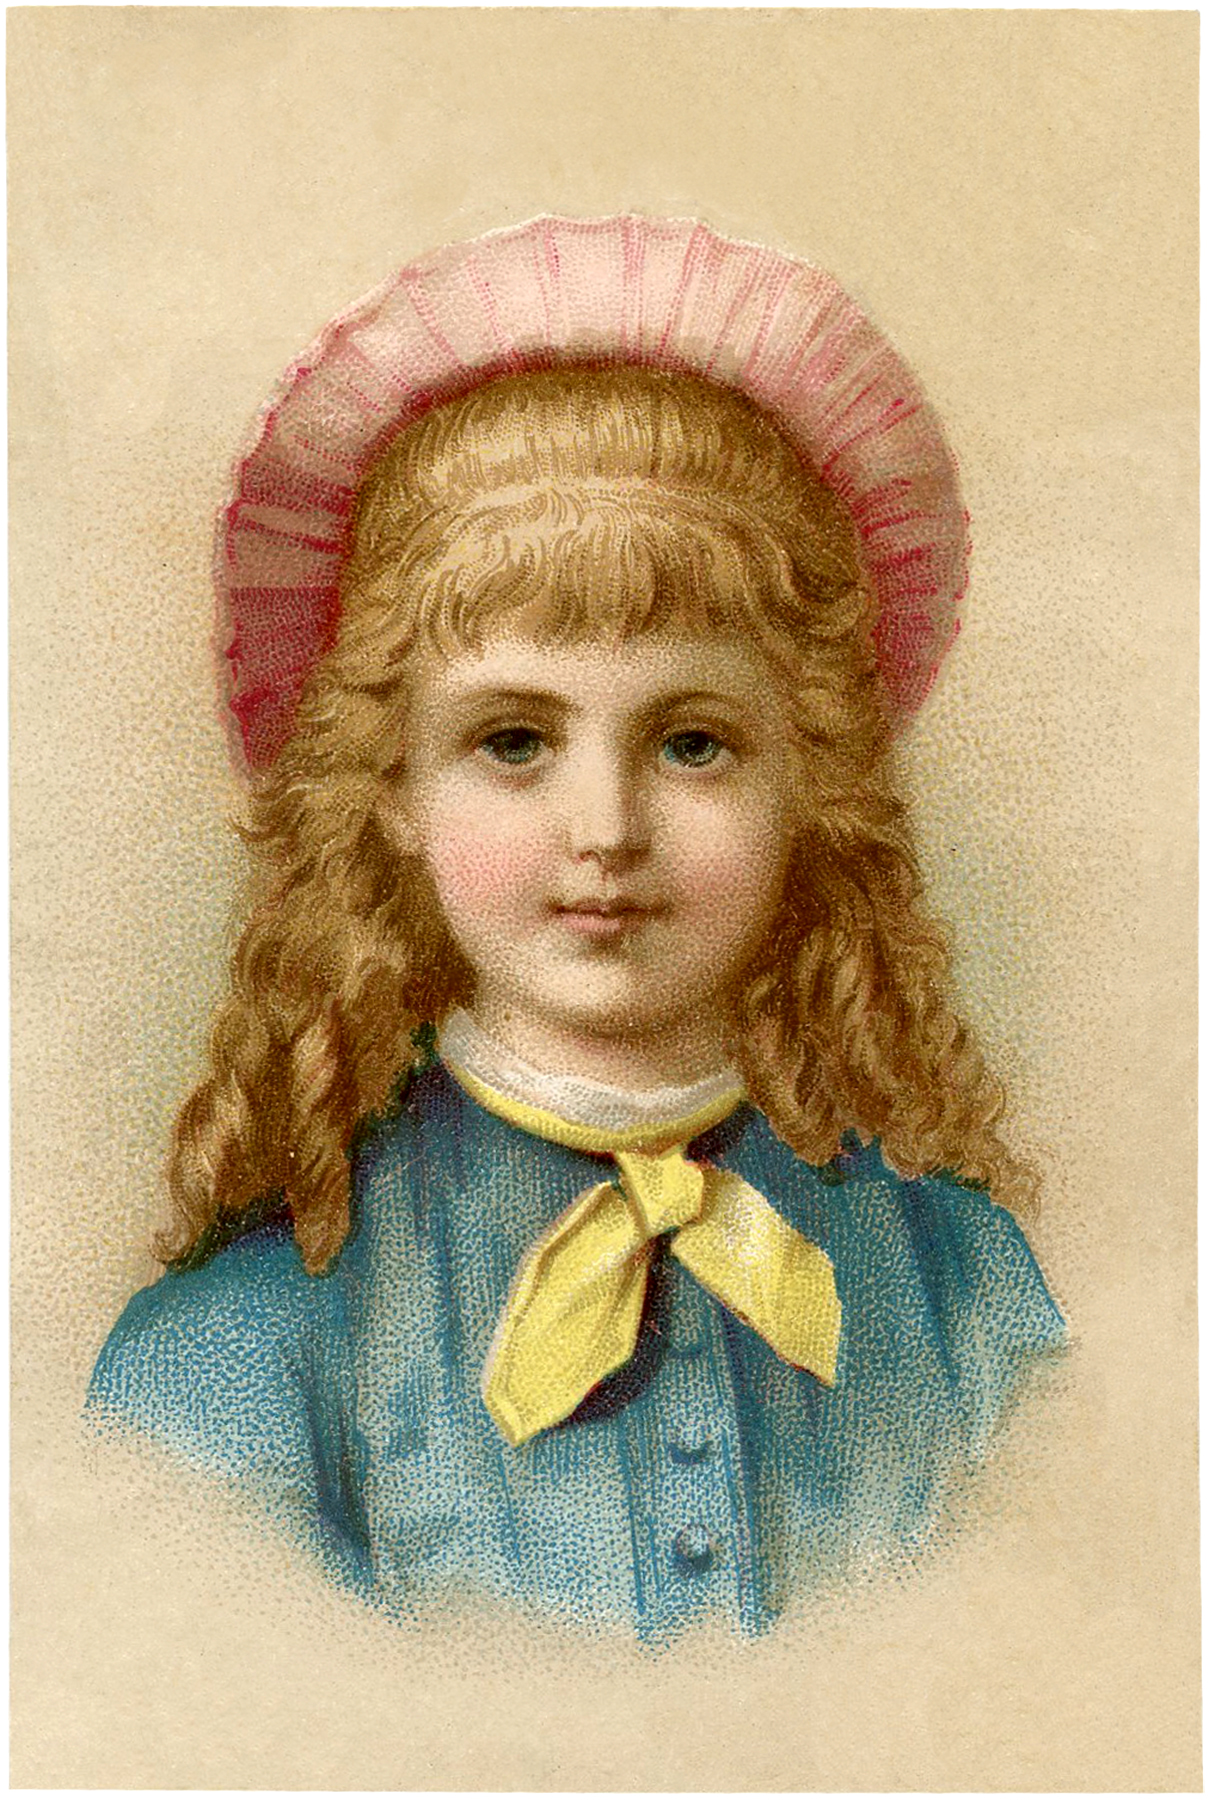 Antique Child with Hat Image